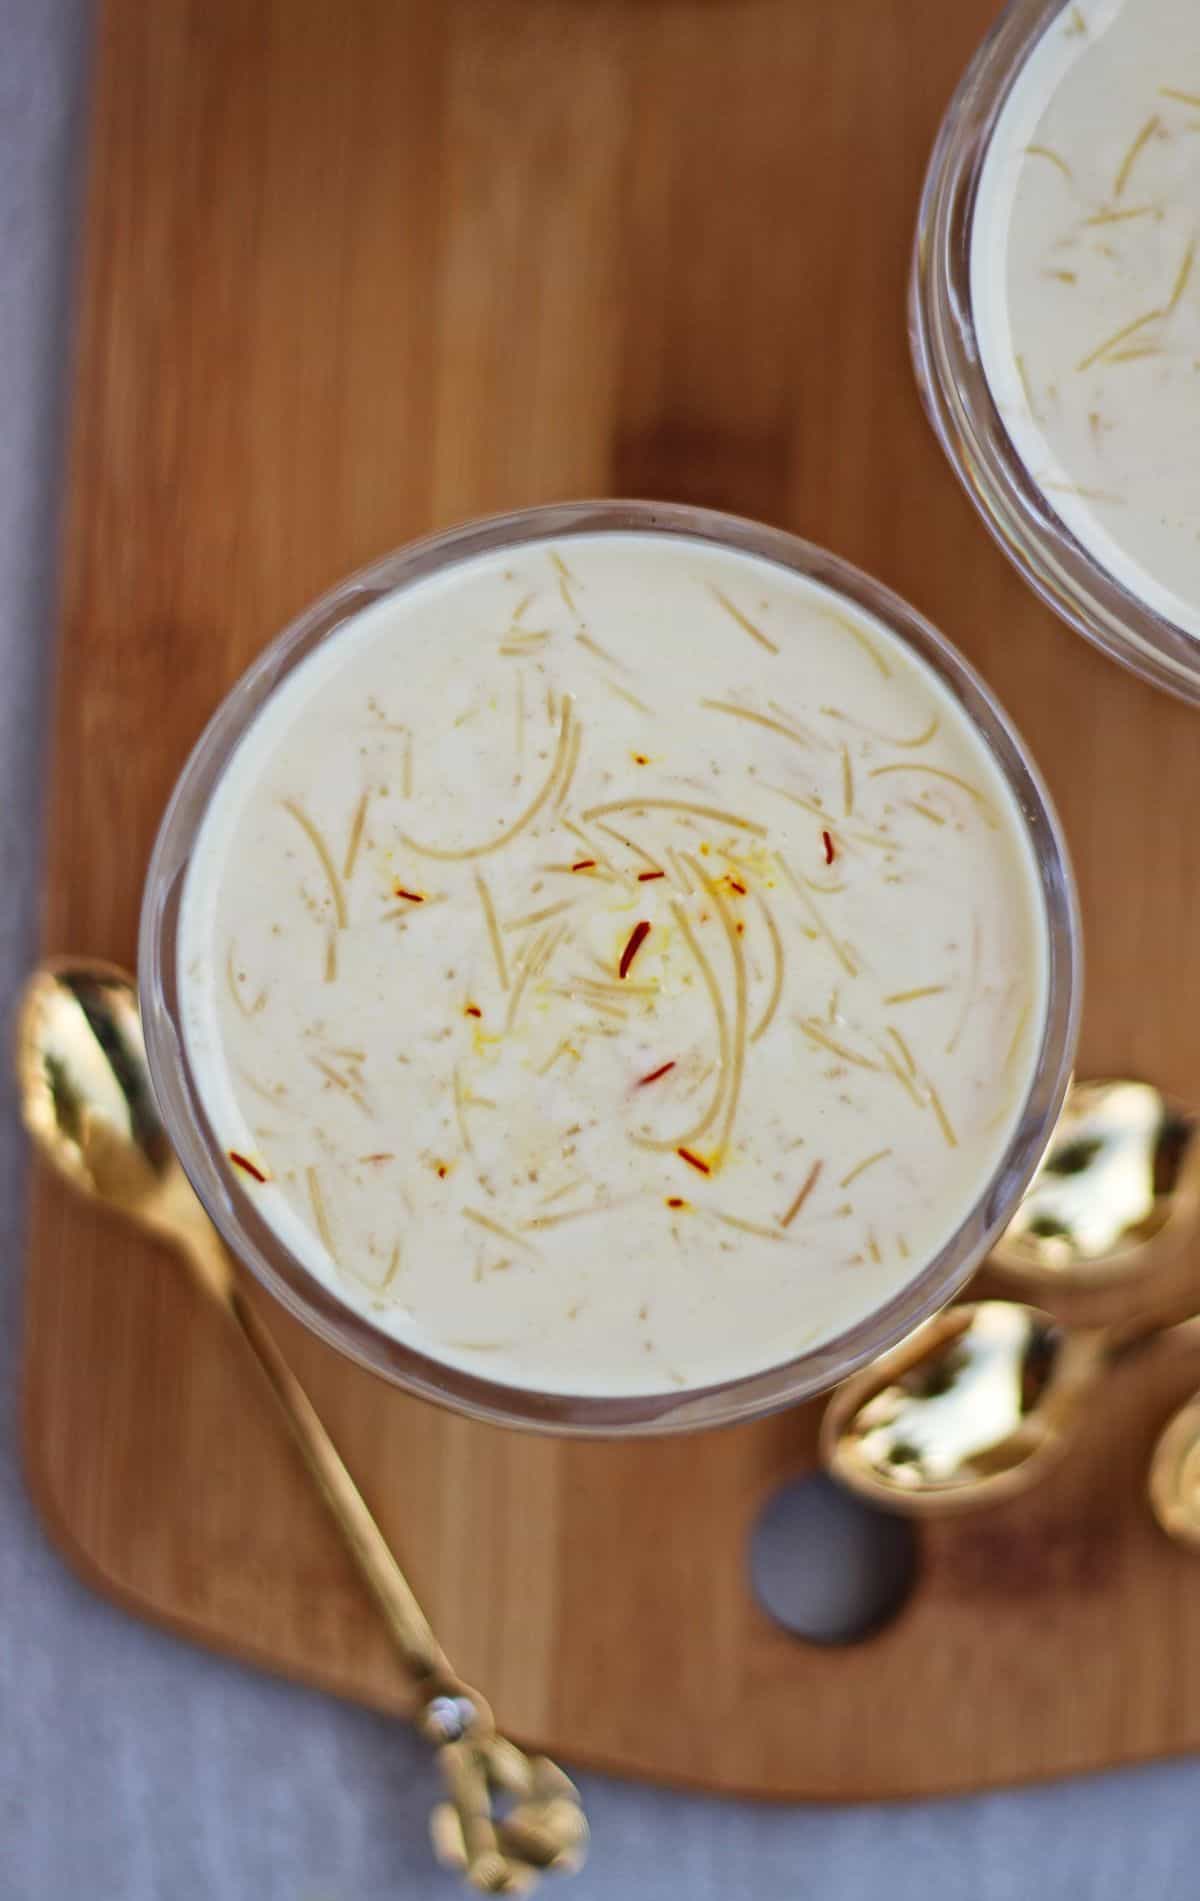 kheer with vermicelli and saffron threads on top